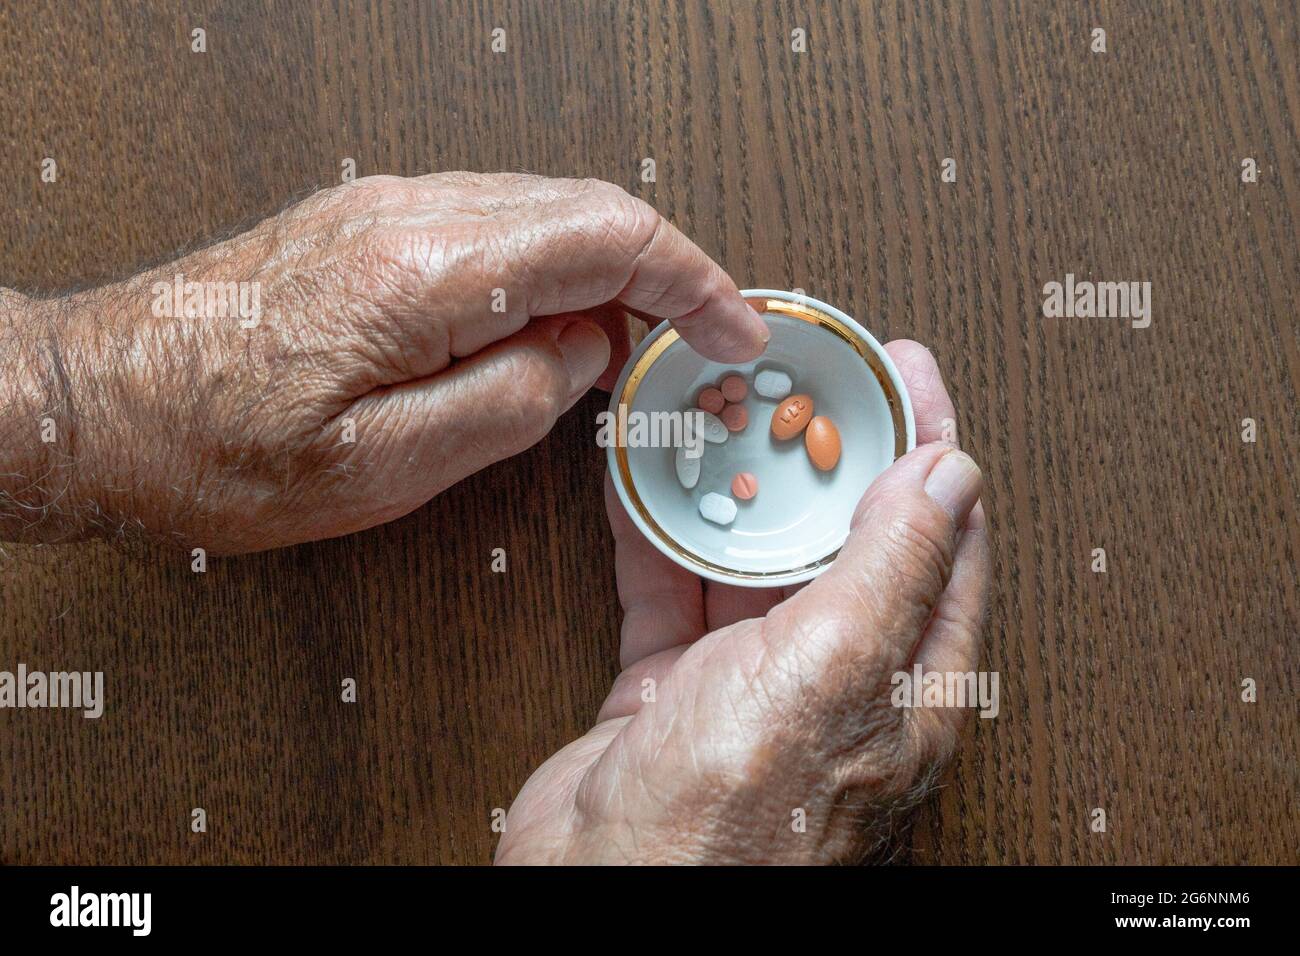 An elderly man holding a cup of pills in his hands selects the desired pill from it Stock Photo